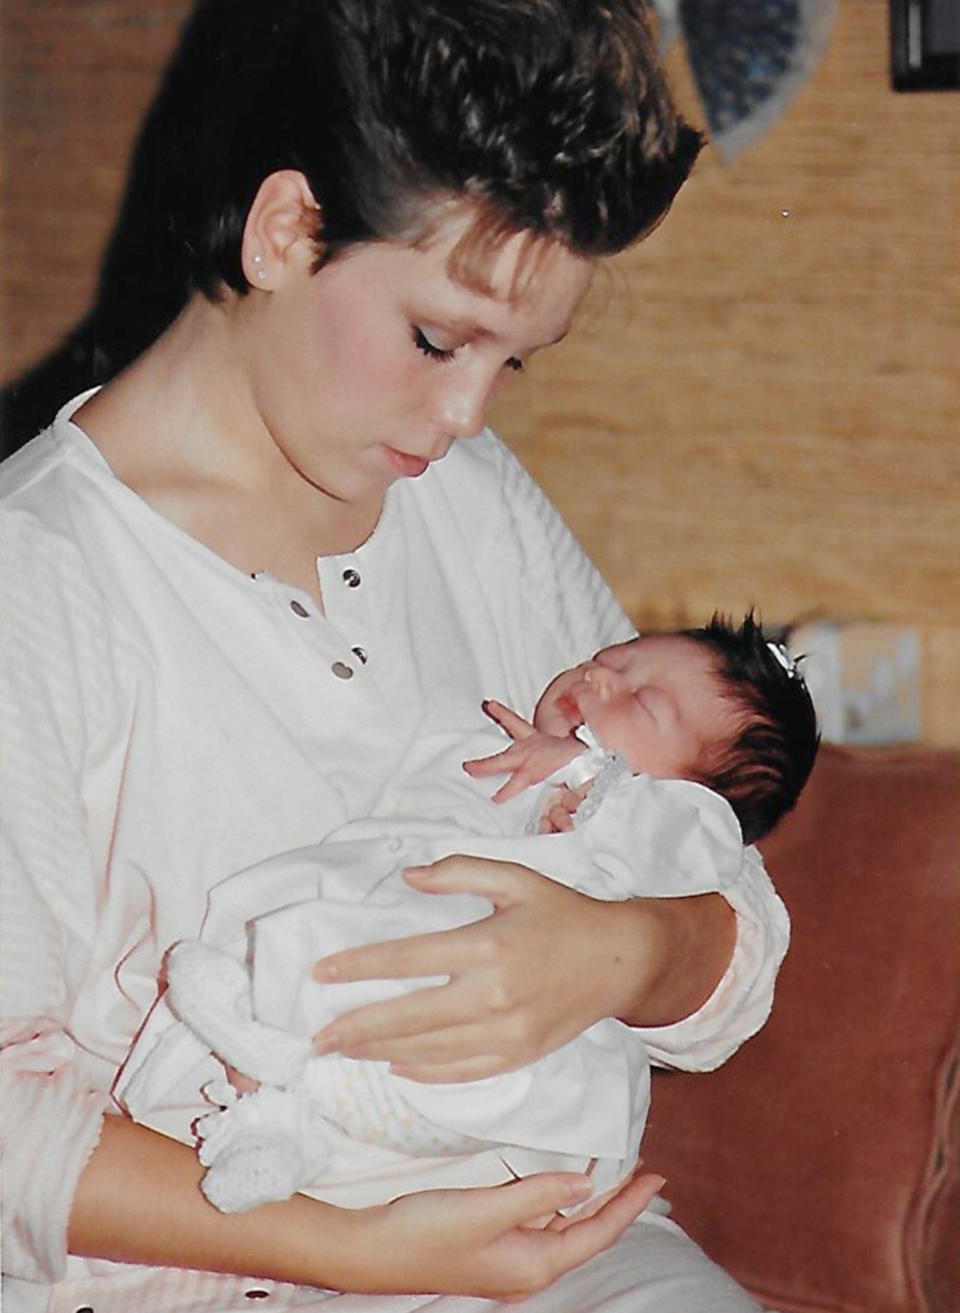 Angie Howard, at age 17, holds her newborn baby Rachel Ruiz before placing her for adoption. The pair would reunite 34 years later. (Courtesy Rachel Ruiz)